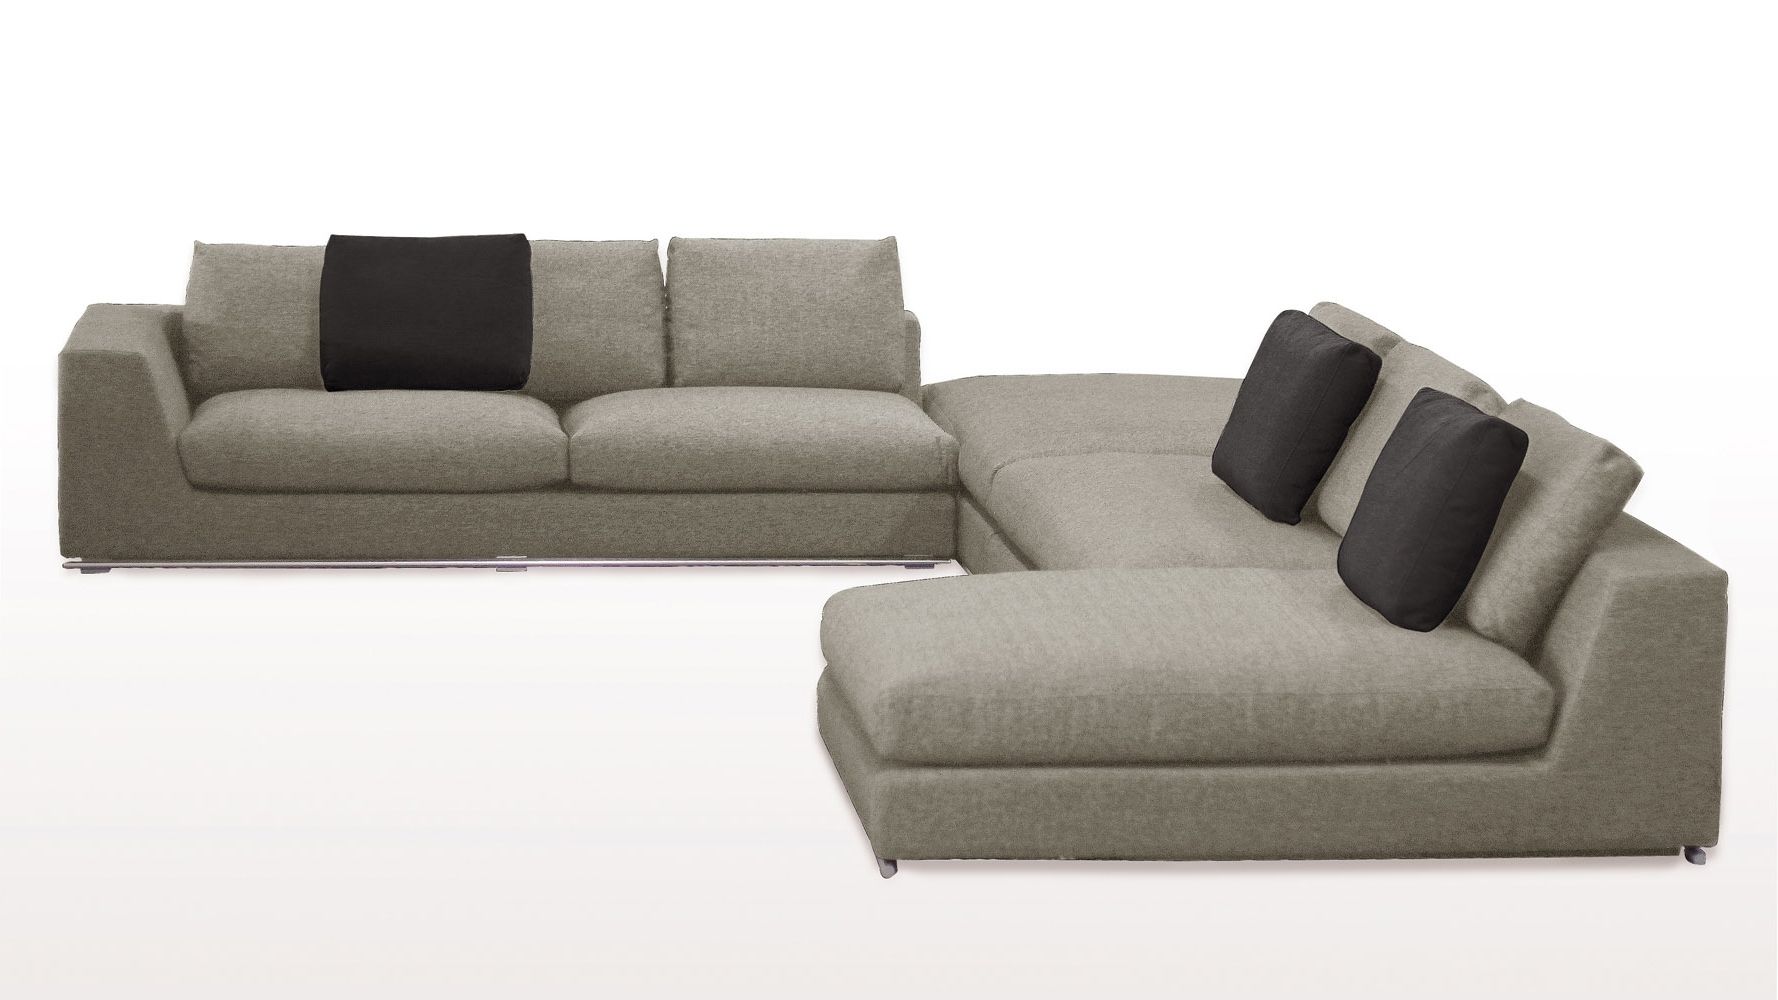 Fancy Armless Sectional Sofa 53 On Sofa Room Ideas With Armless Within Most Recent Armless Sectional Sofas (View 1 of 20)